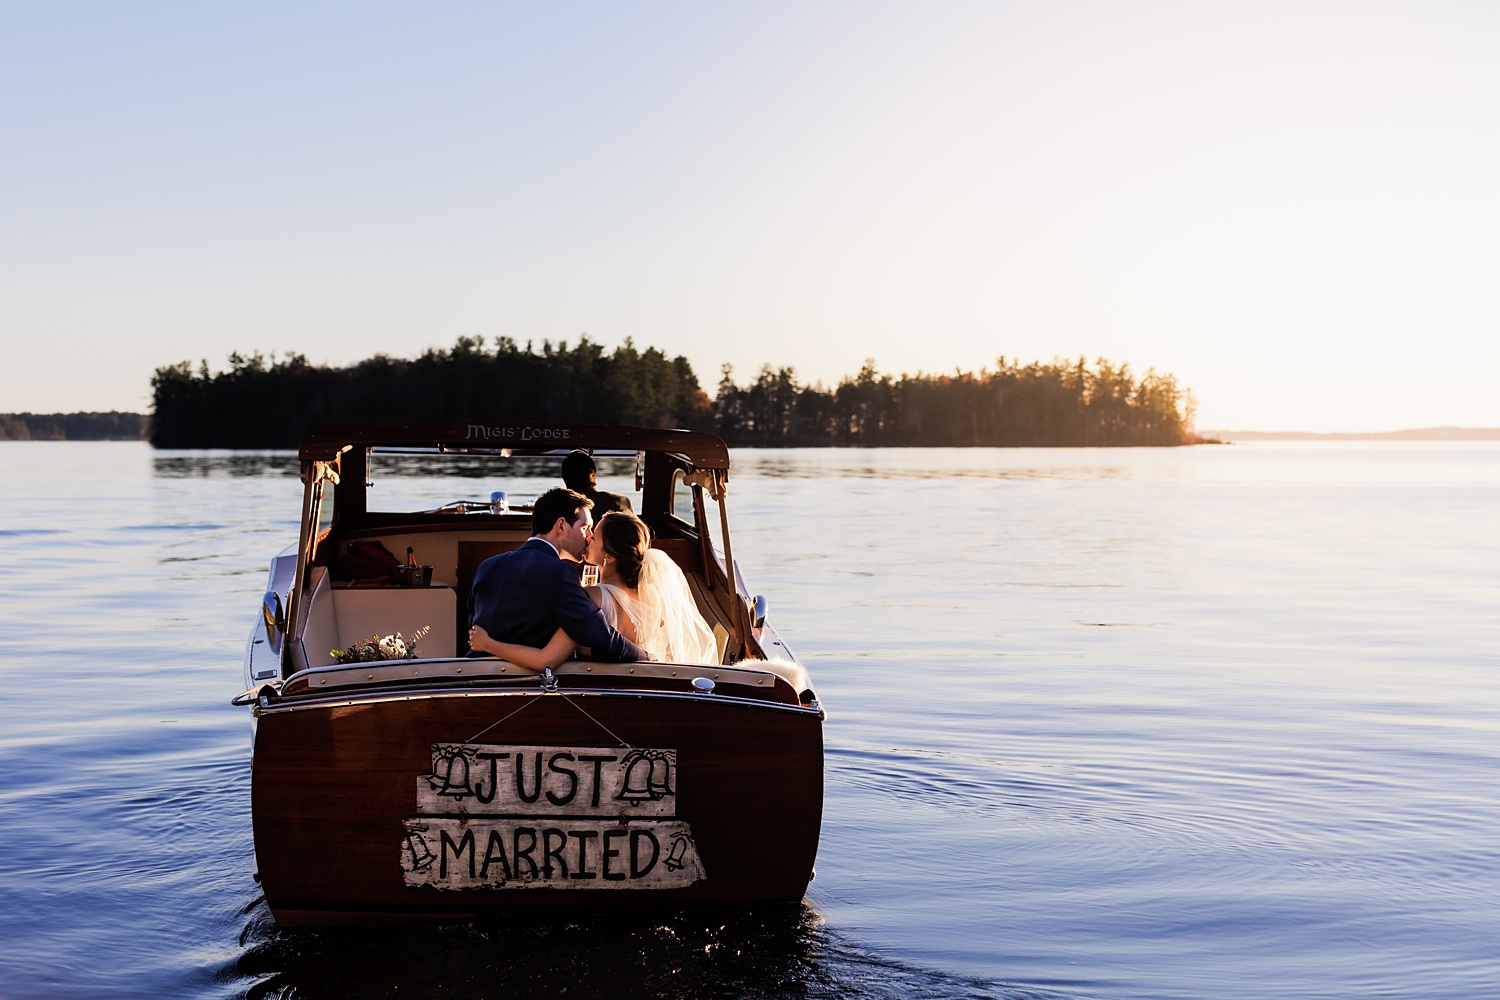 Just Married wedding couple on the boat at Migis Lodge Resort on Sebago Lake Maine